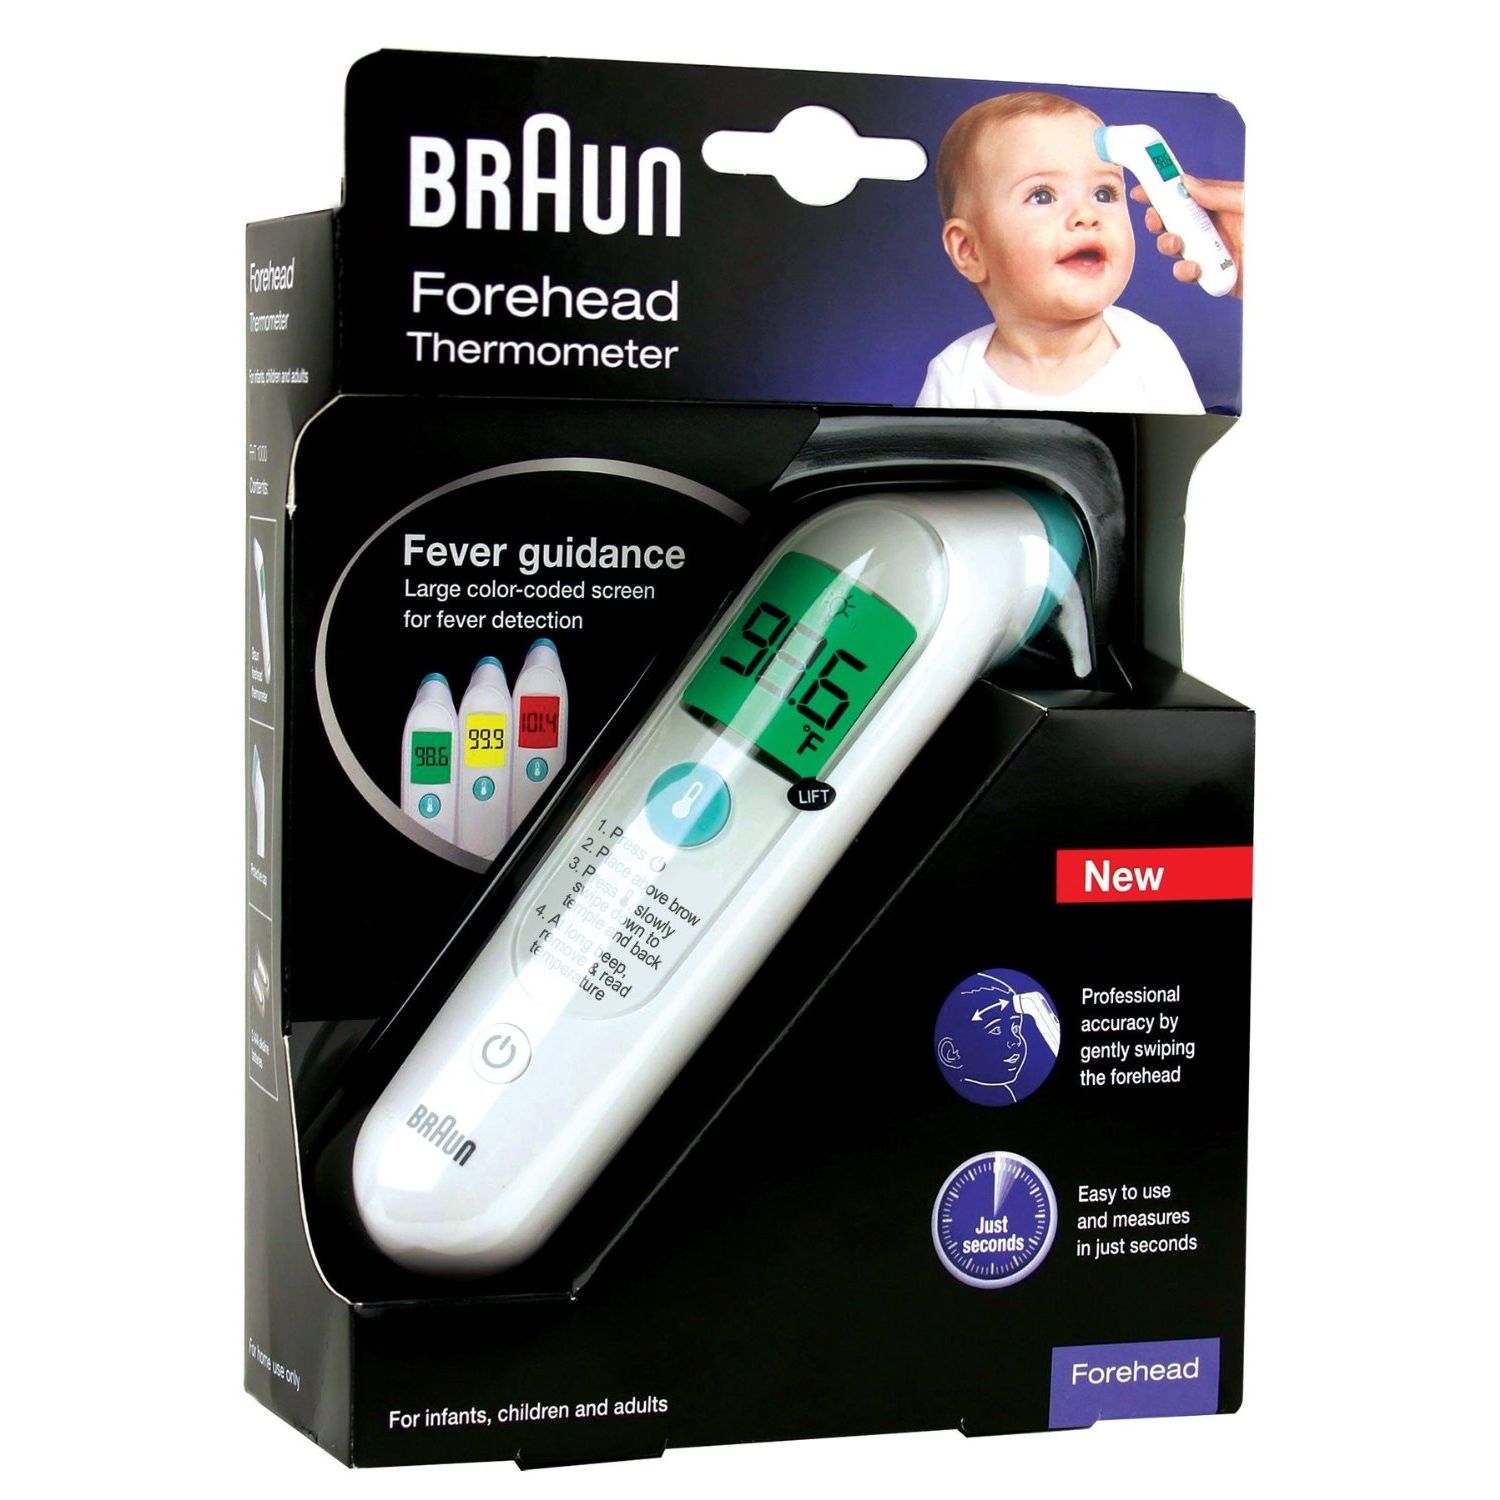 Braun Forehead Thermometer FHT1000US, White - image 2 of 2